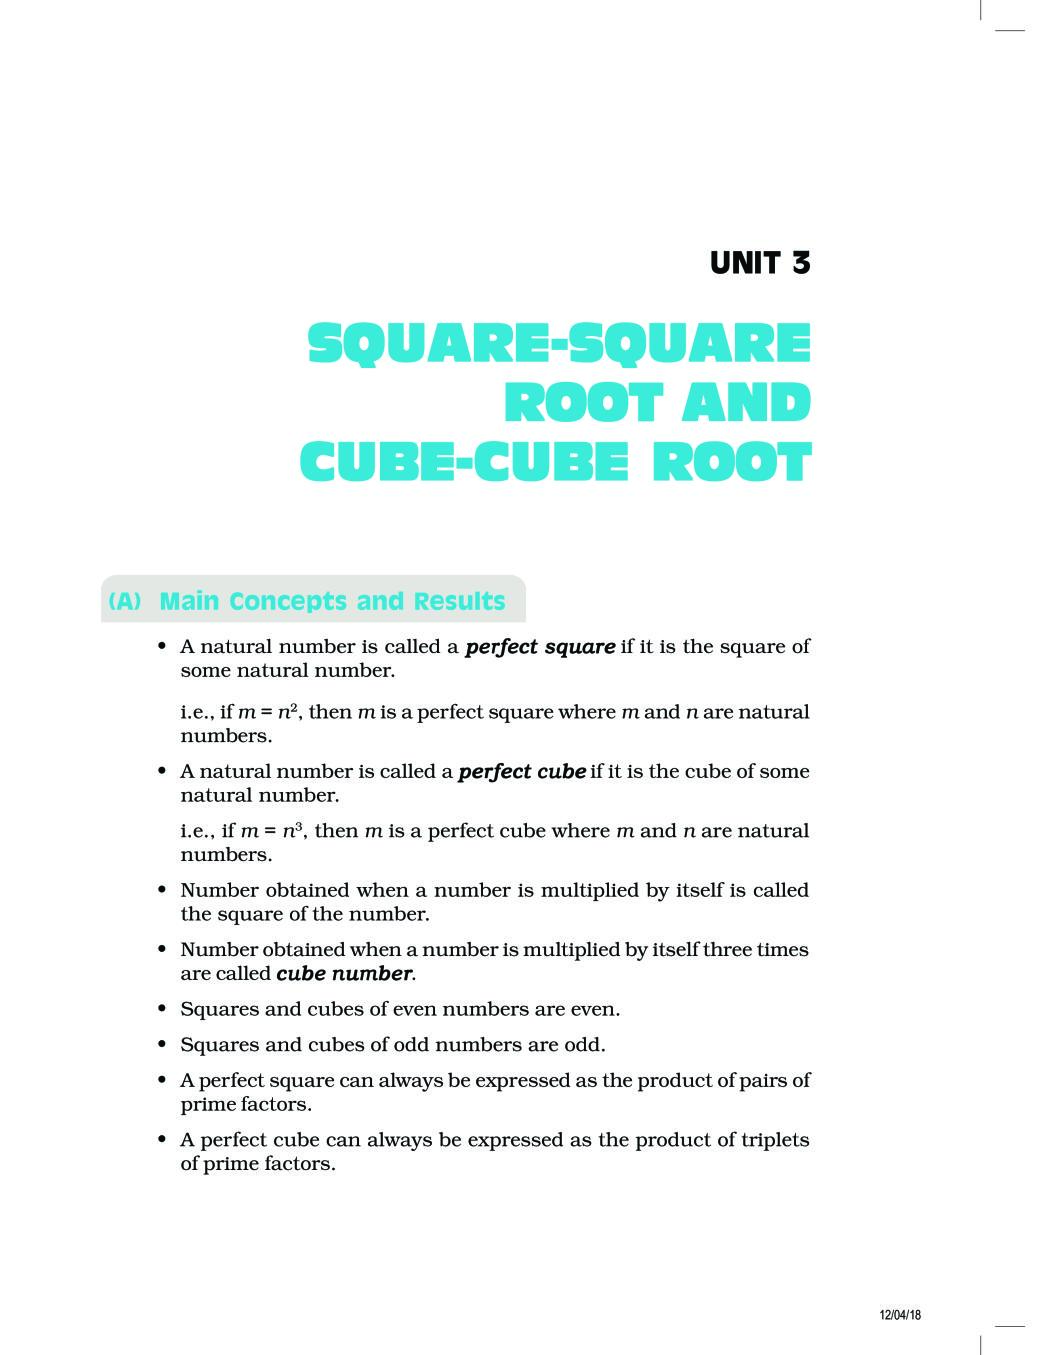 NCERT Exemplar Class 08 Maths Unit 3 Square-Square Root Cube-Cube Root - Page 1